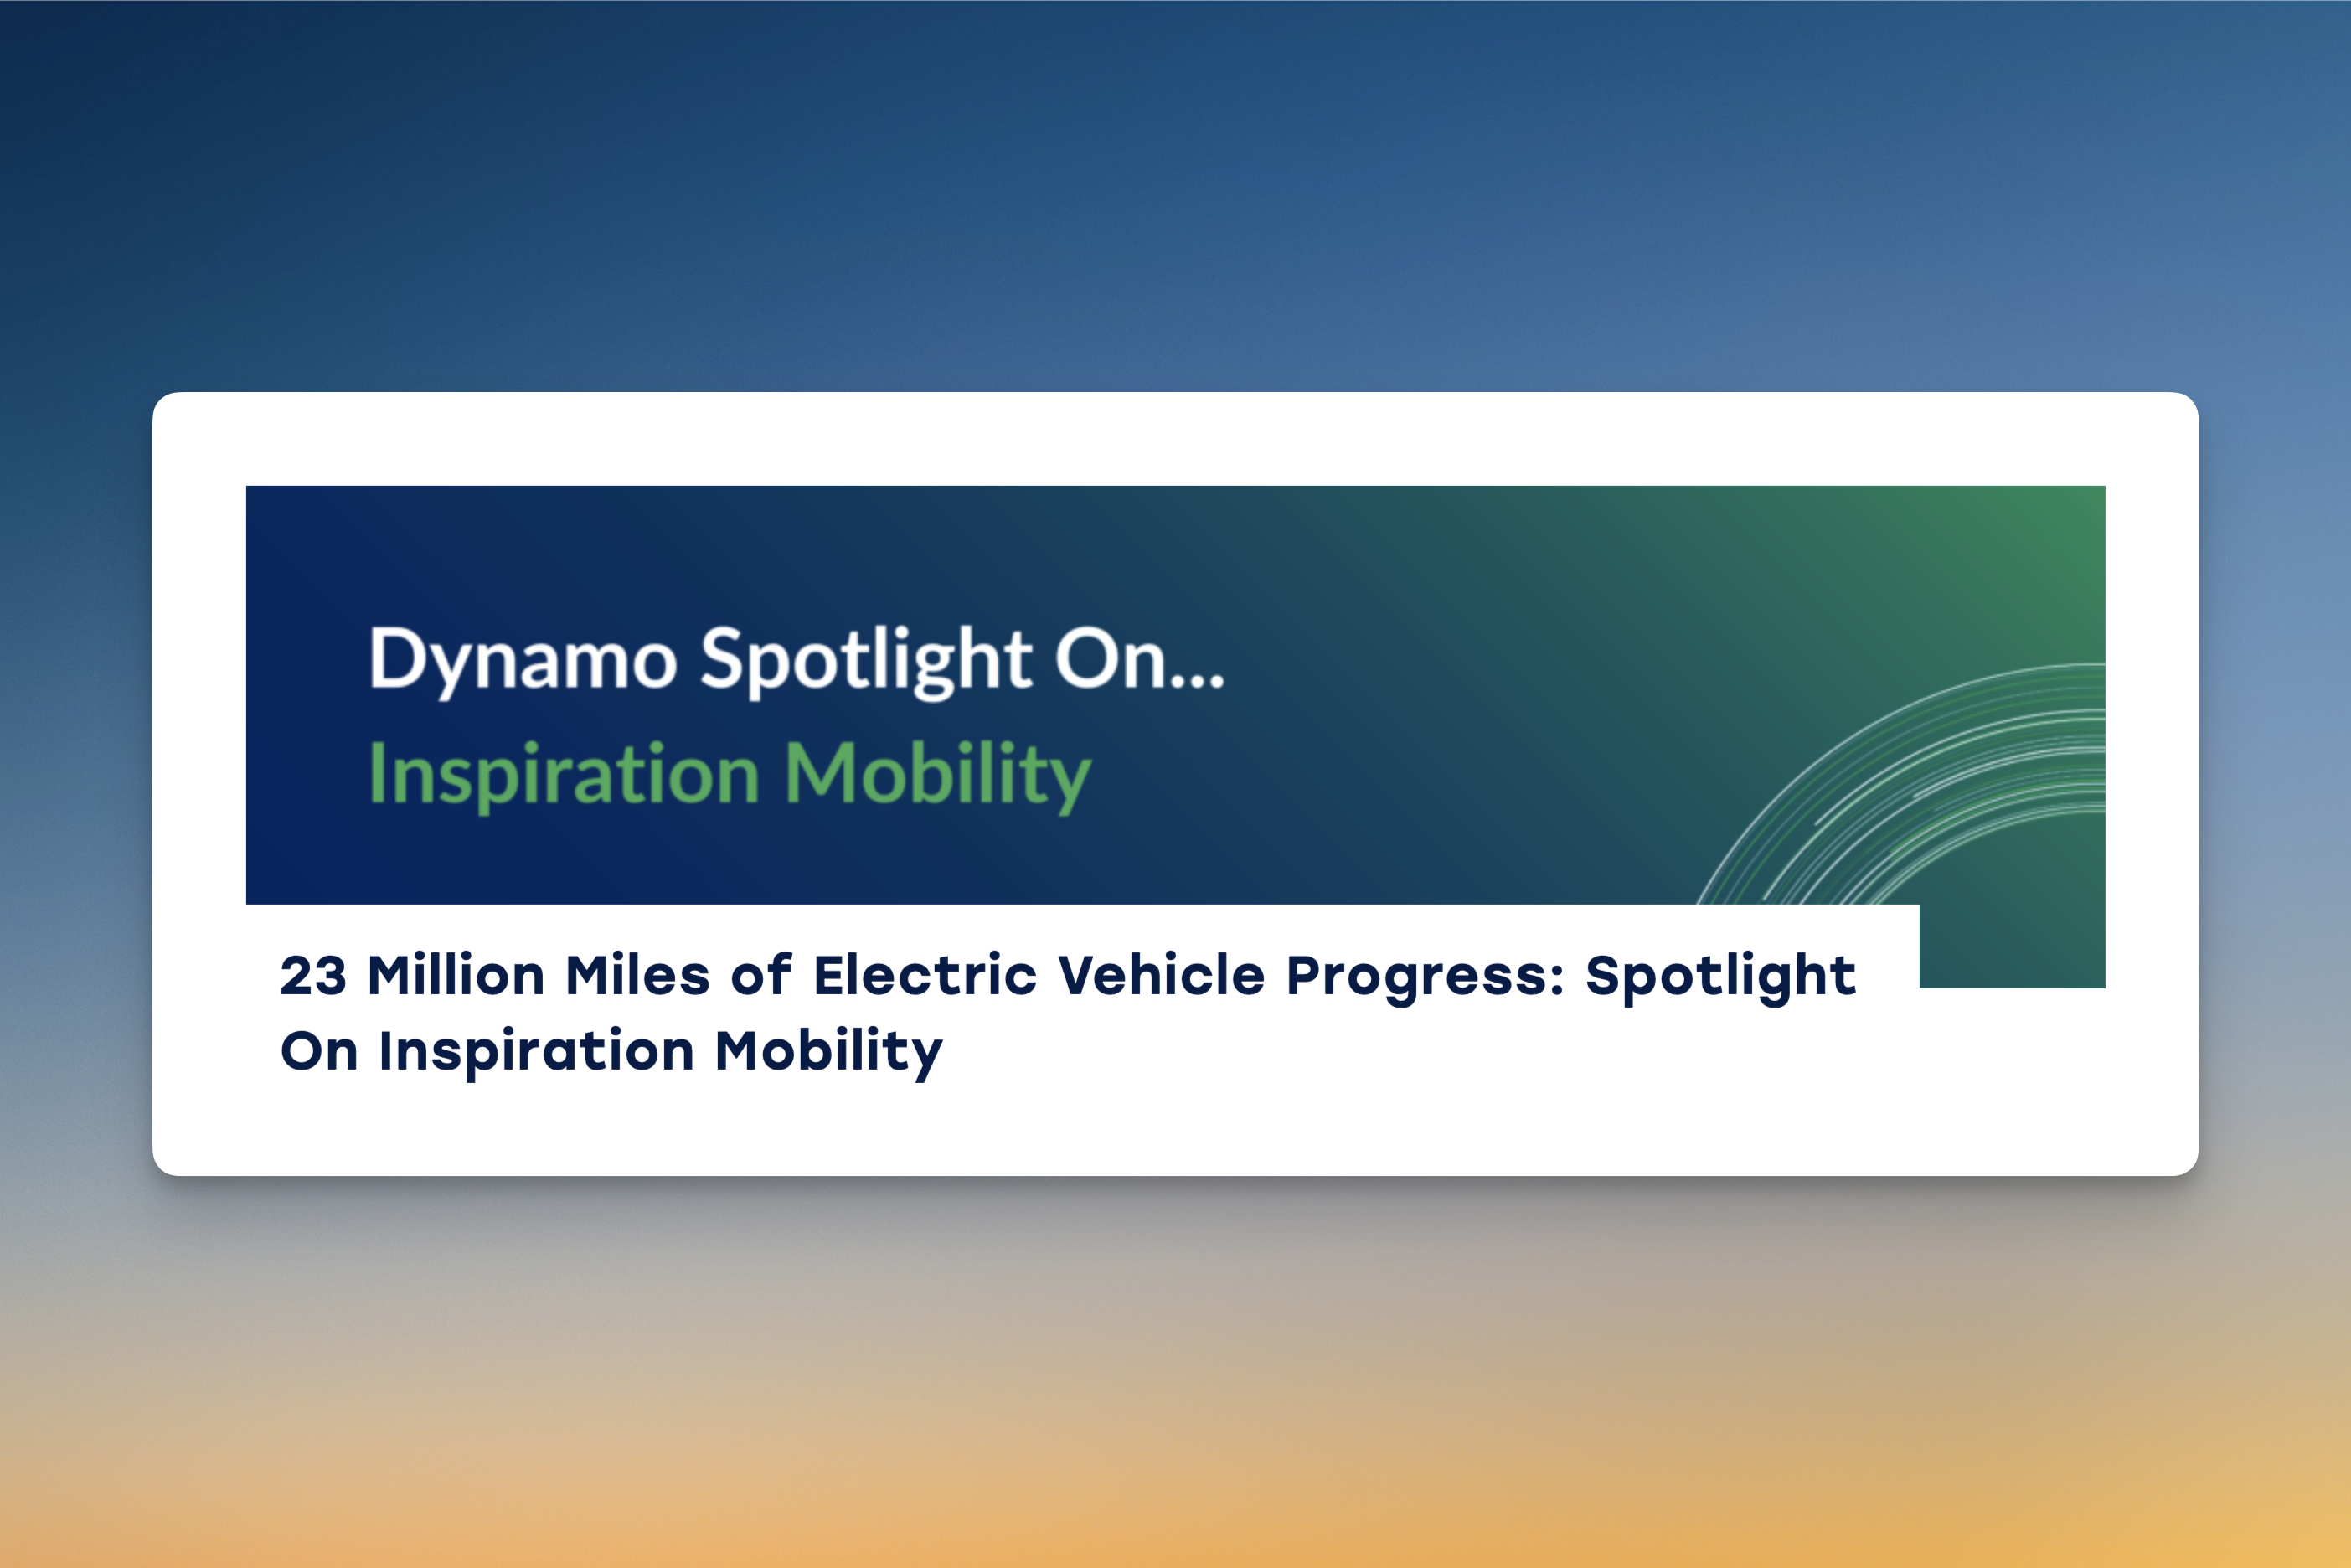 Graphic banner displaying the text 'Dynamo Spotlight On... Inspiration Mobility' above the tagline '23 Million Miles of Electric Vehicle Progress: Spotlight On Inspiration Mobility' on a dark teal background with abstract green lines curving on the right side.